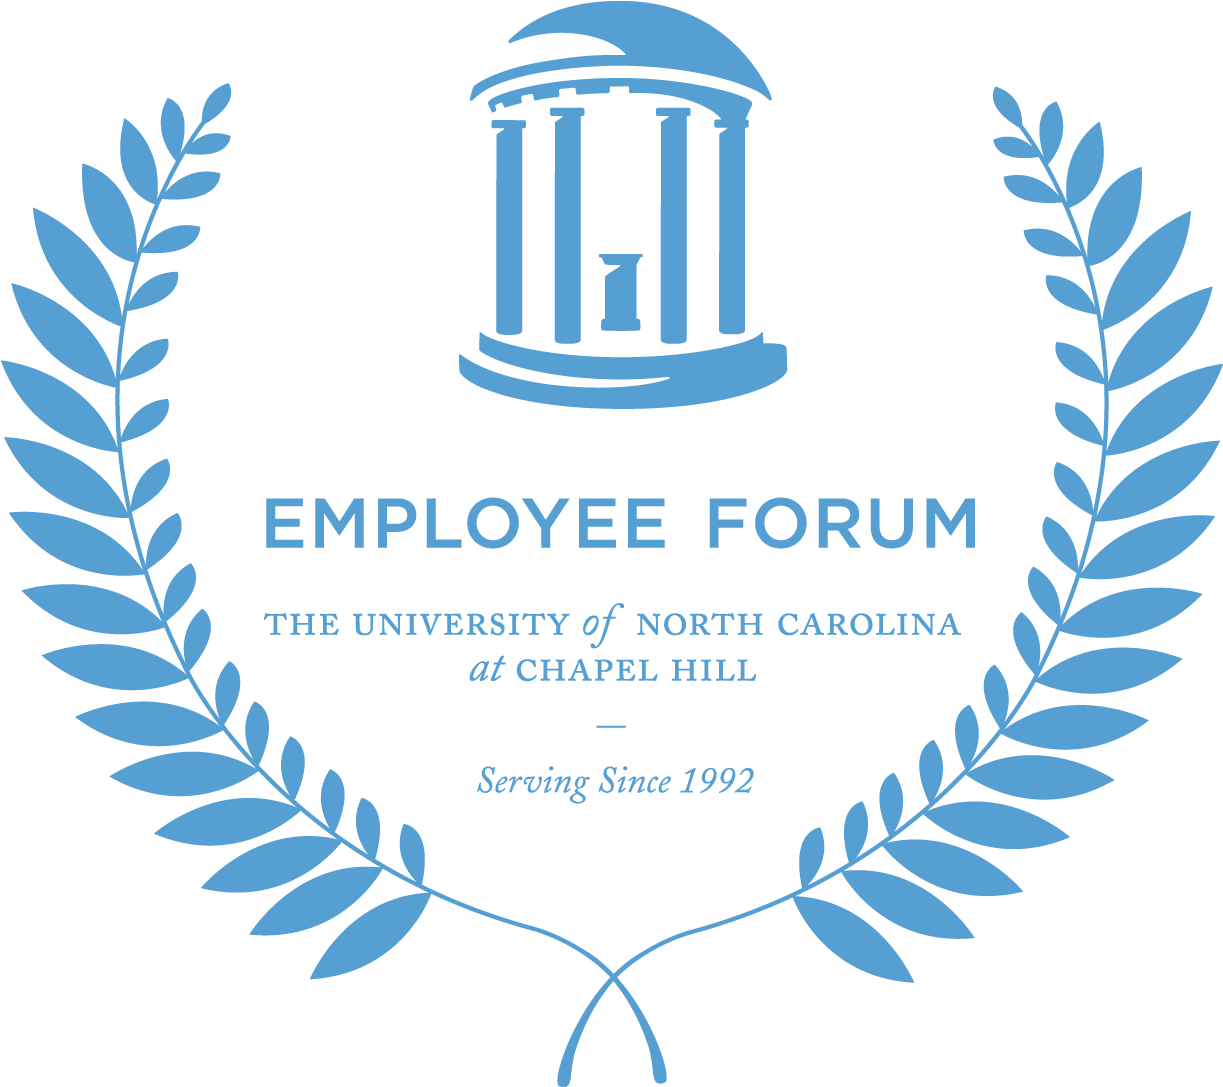 Join The Employee Forum On Friday, June 8, 2018 From - University Of North Carolina At Chapel Hill (1256x1114)